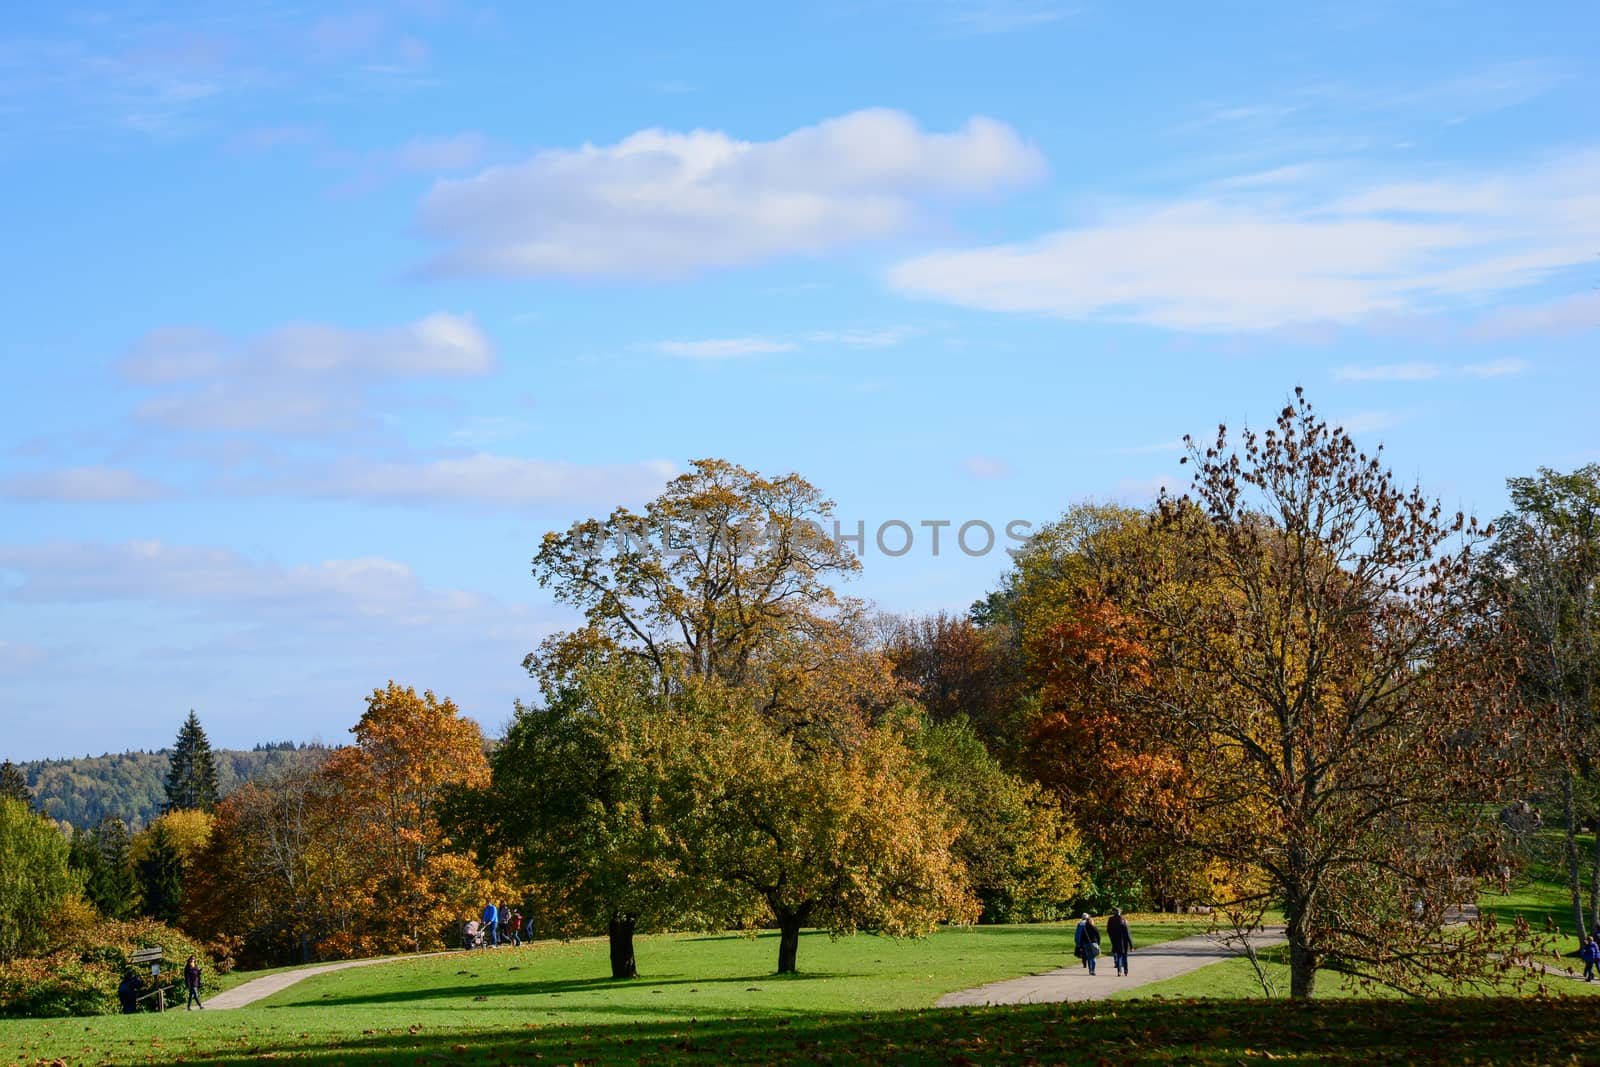 Photo of clouds over autumn trees in a park. Nature photography.